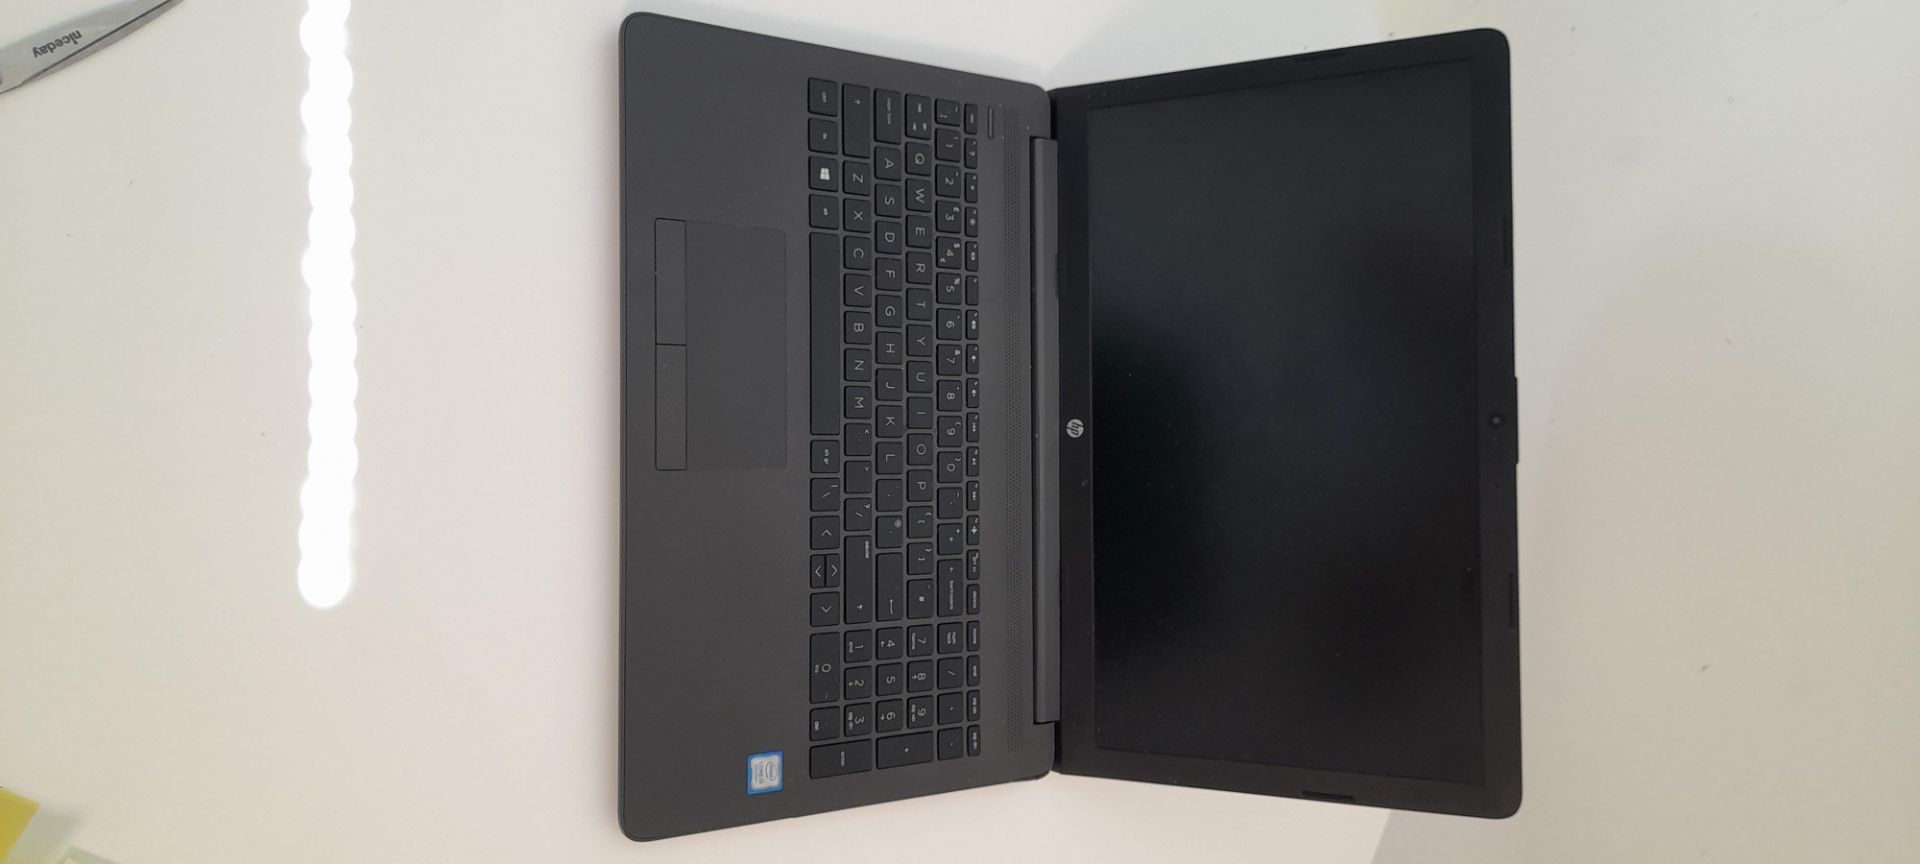 2x HP G250 G7 laptop with intel Core i5, 8th Gen. Collection from Canary Wharf, London, E14 - Image 10 of 15